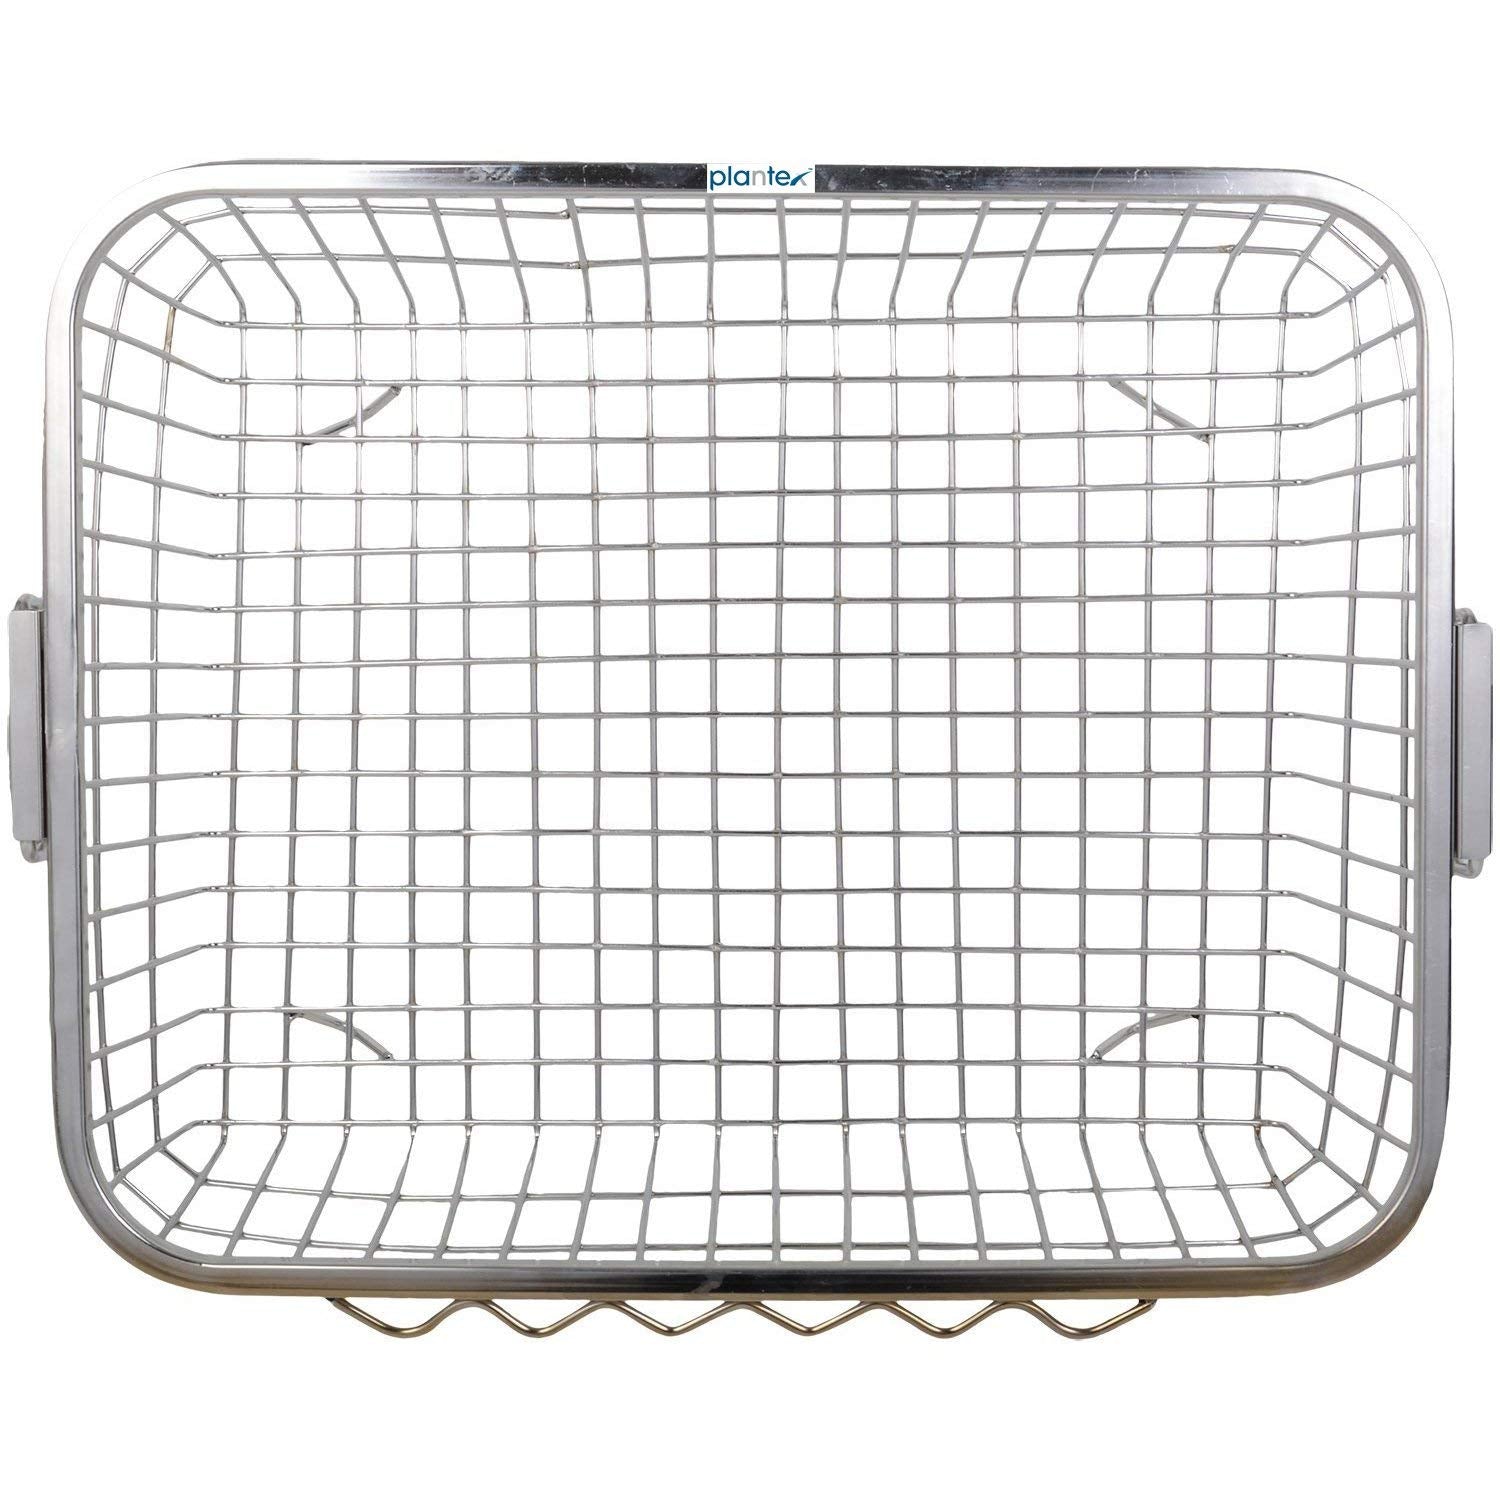 Plantex Stainless-Steel Dish Drainer Basket/Dish Drying Rack/Plate Stand/Bartan Basket (Size-48x37x20cm)